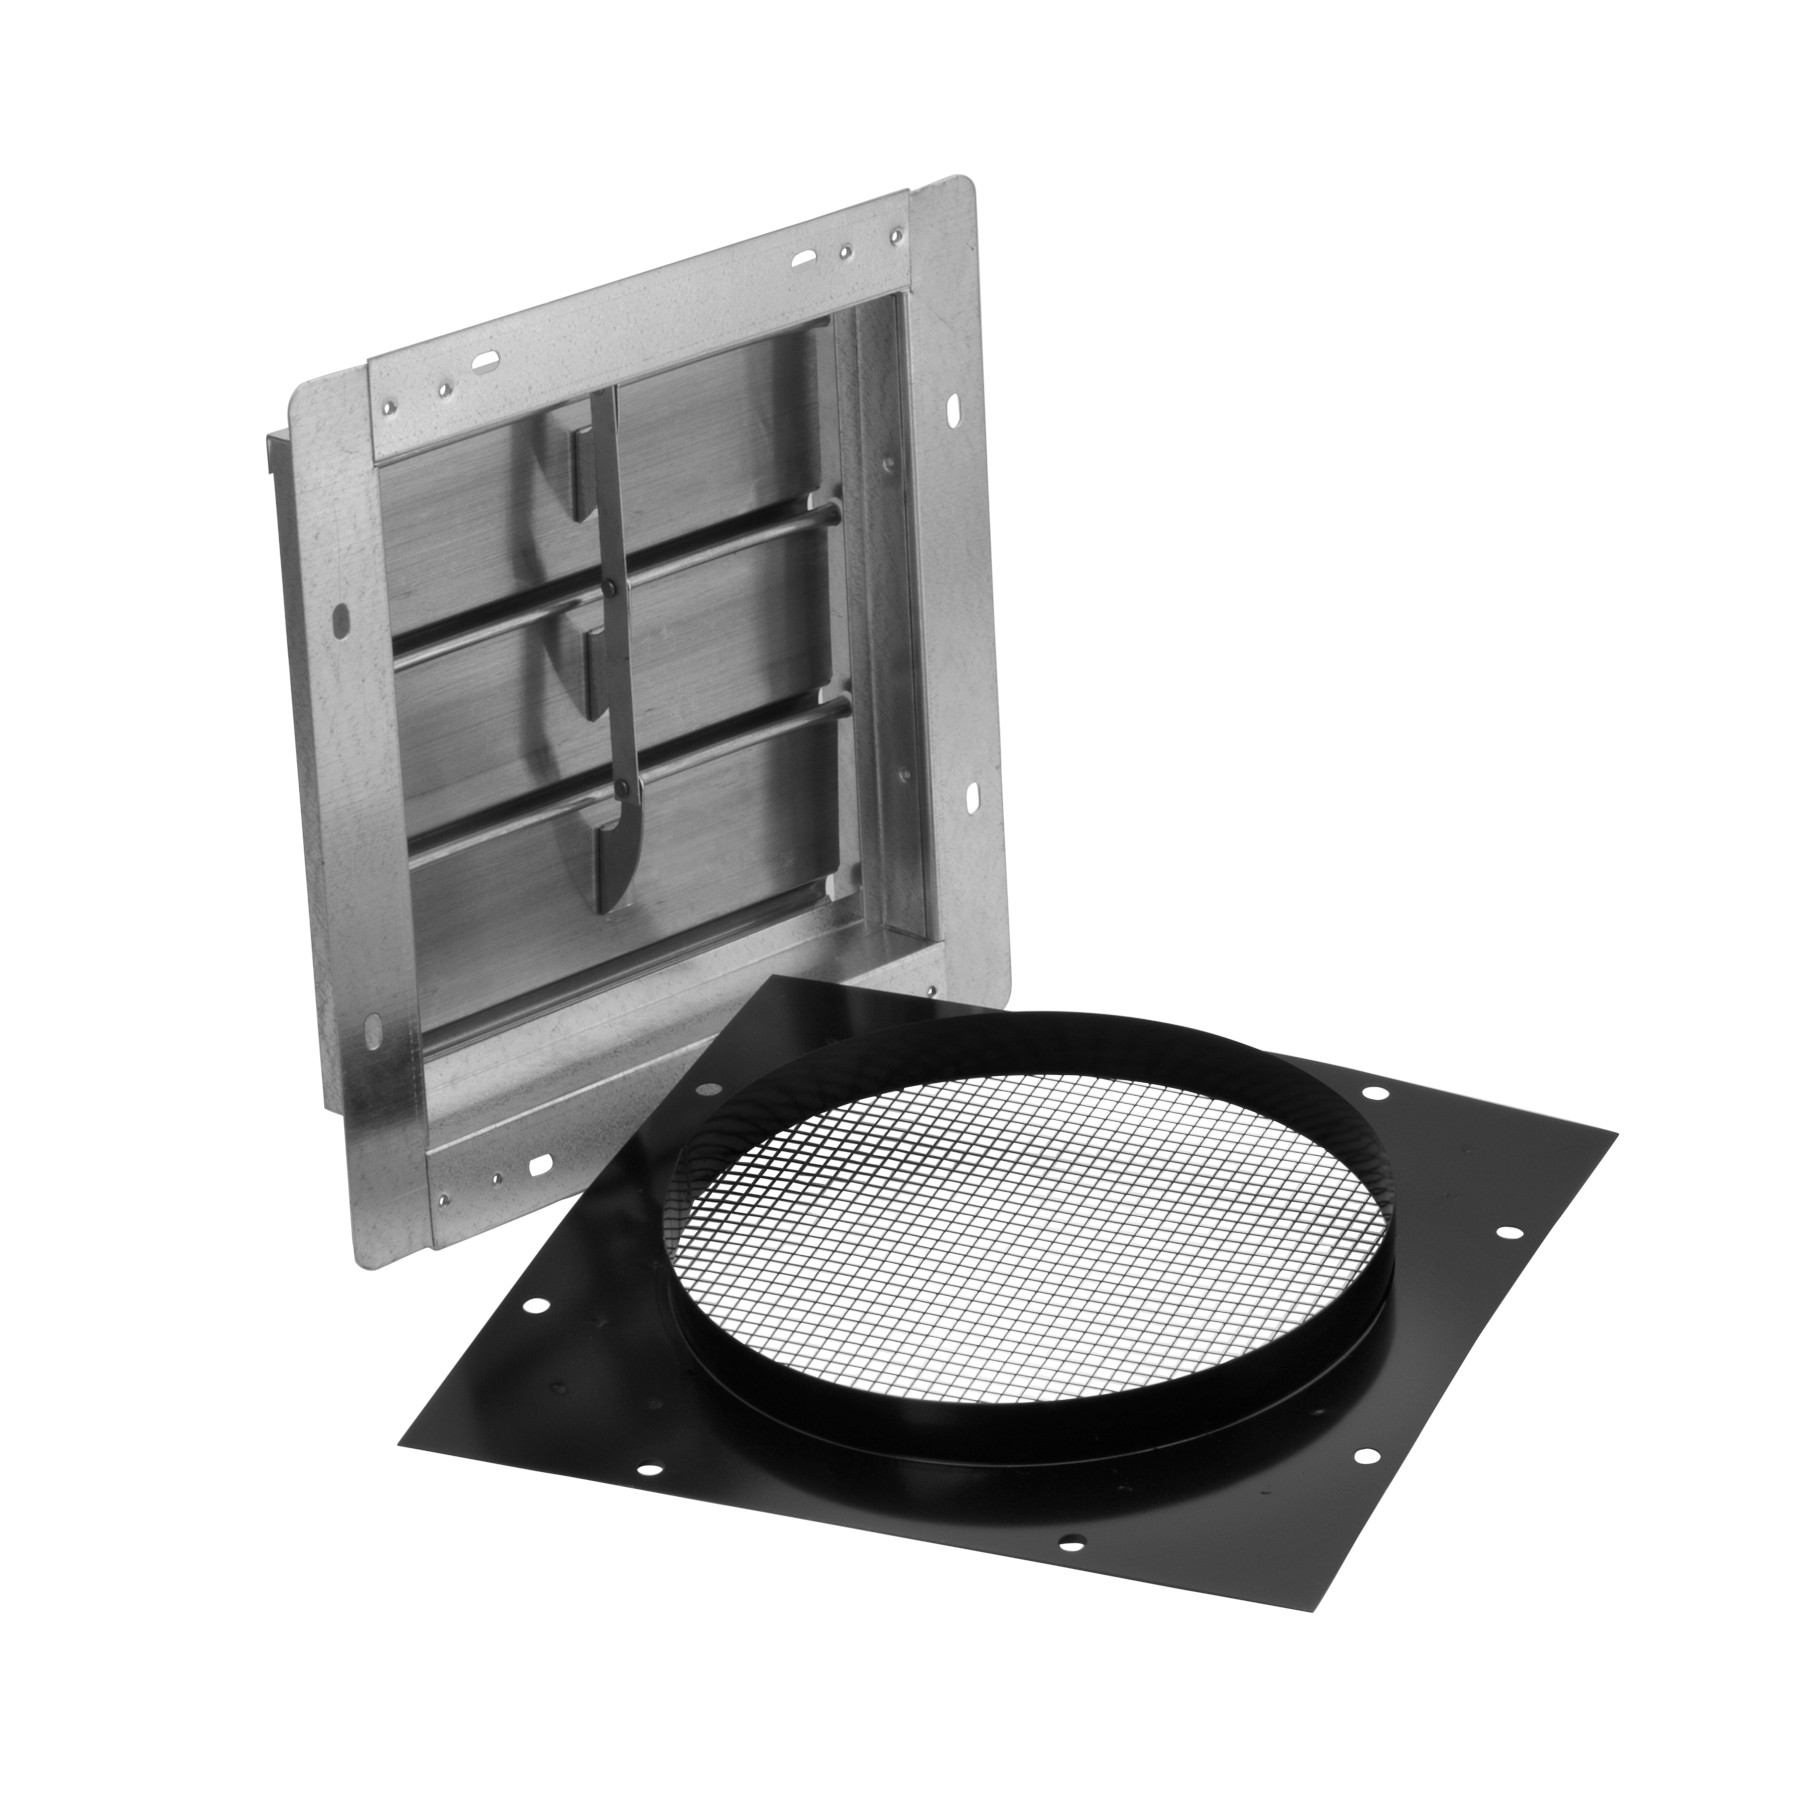 Broan-NuTone® 10-Inch Wall Cap for Range Hoods and Bath Ventilation Fans